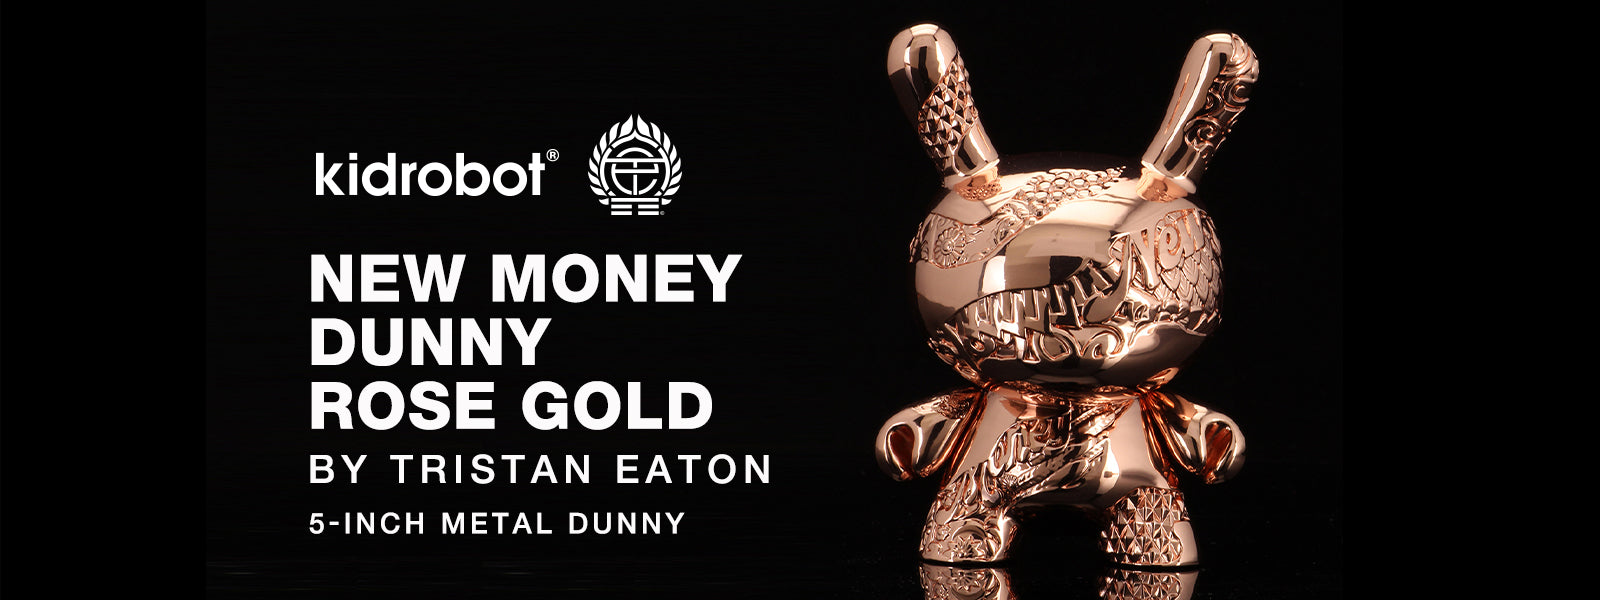 Kidrobot New Money 5" Metal Dunny by Tristan Eaton - Rose Gold Edition